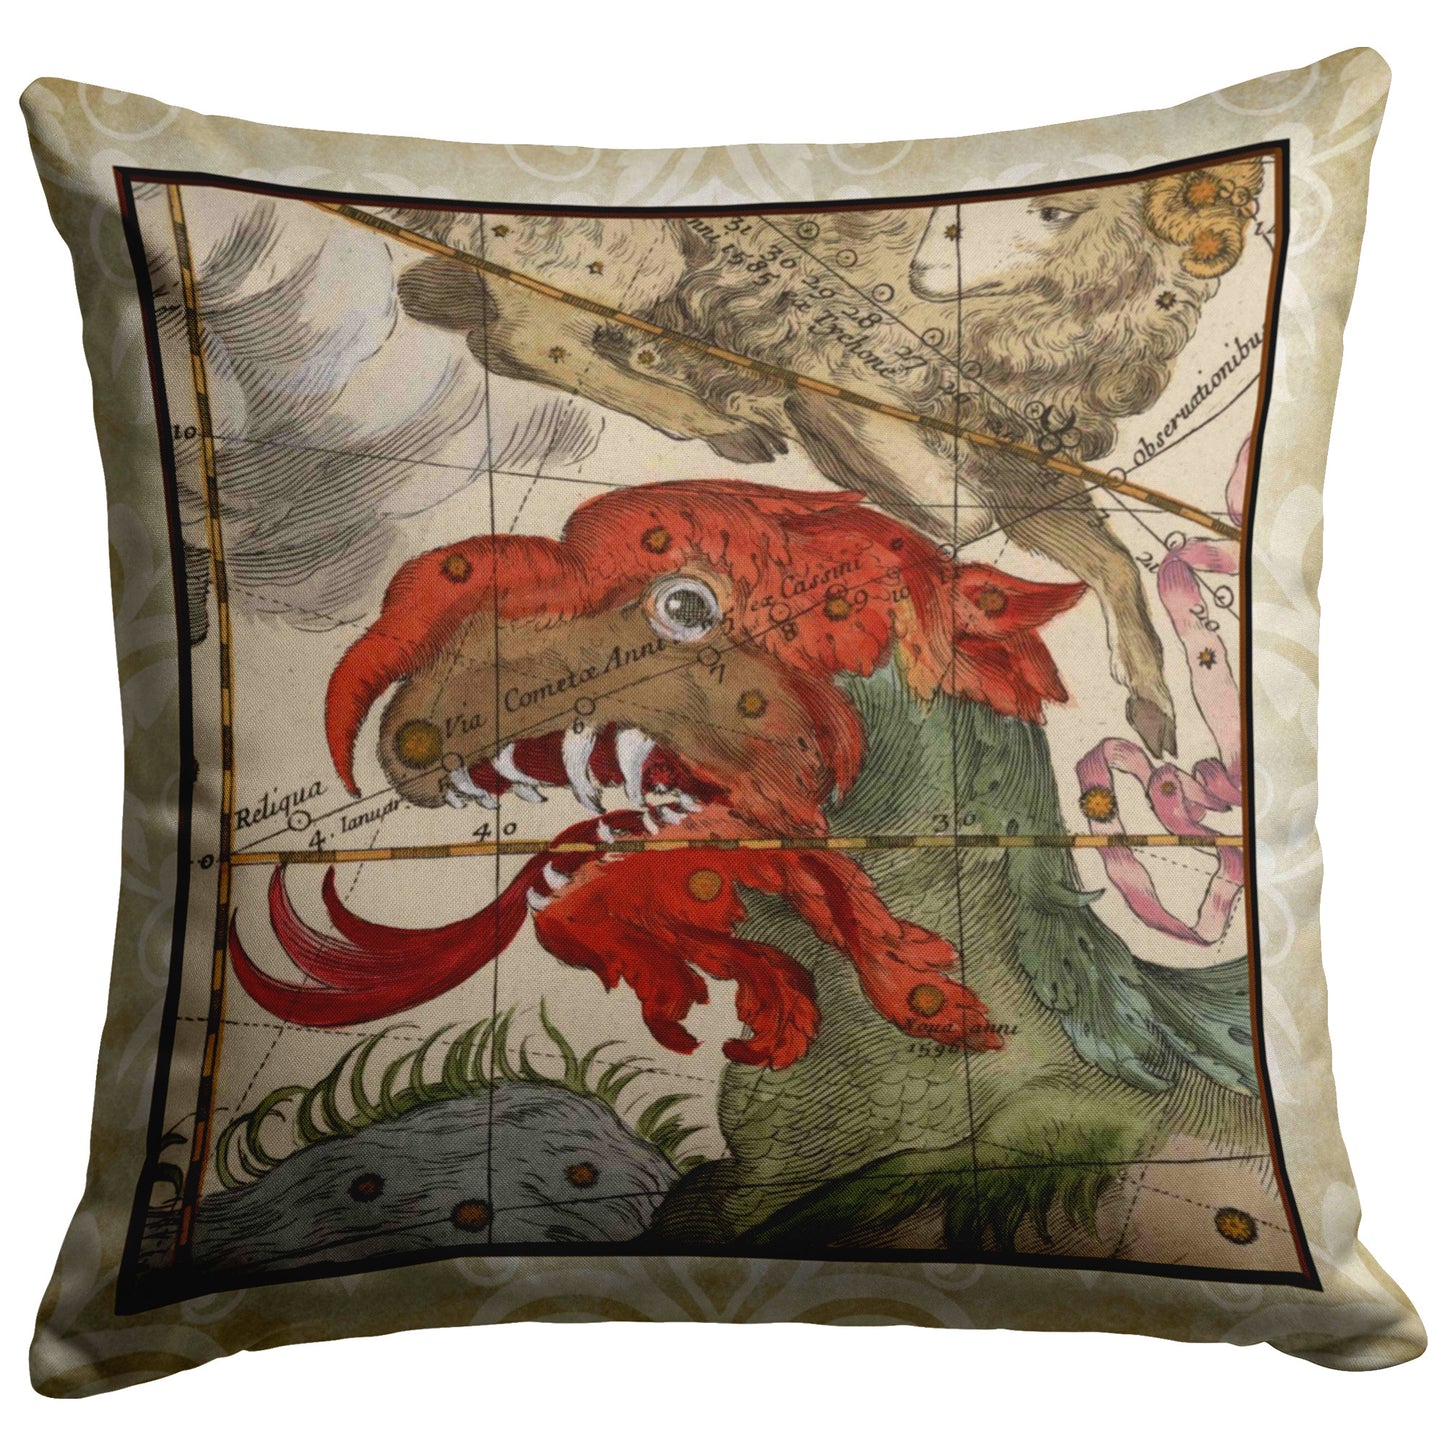 Sea Monster Throw Pillow - Red Head